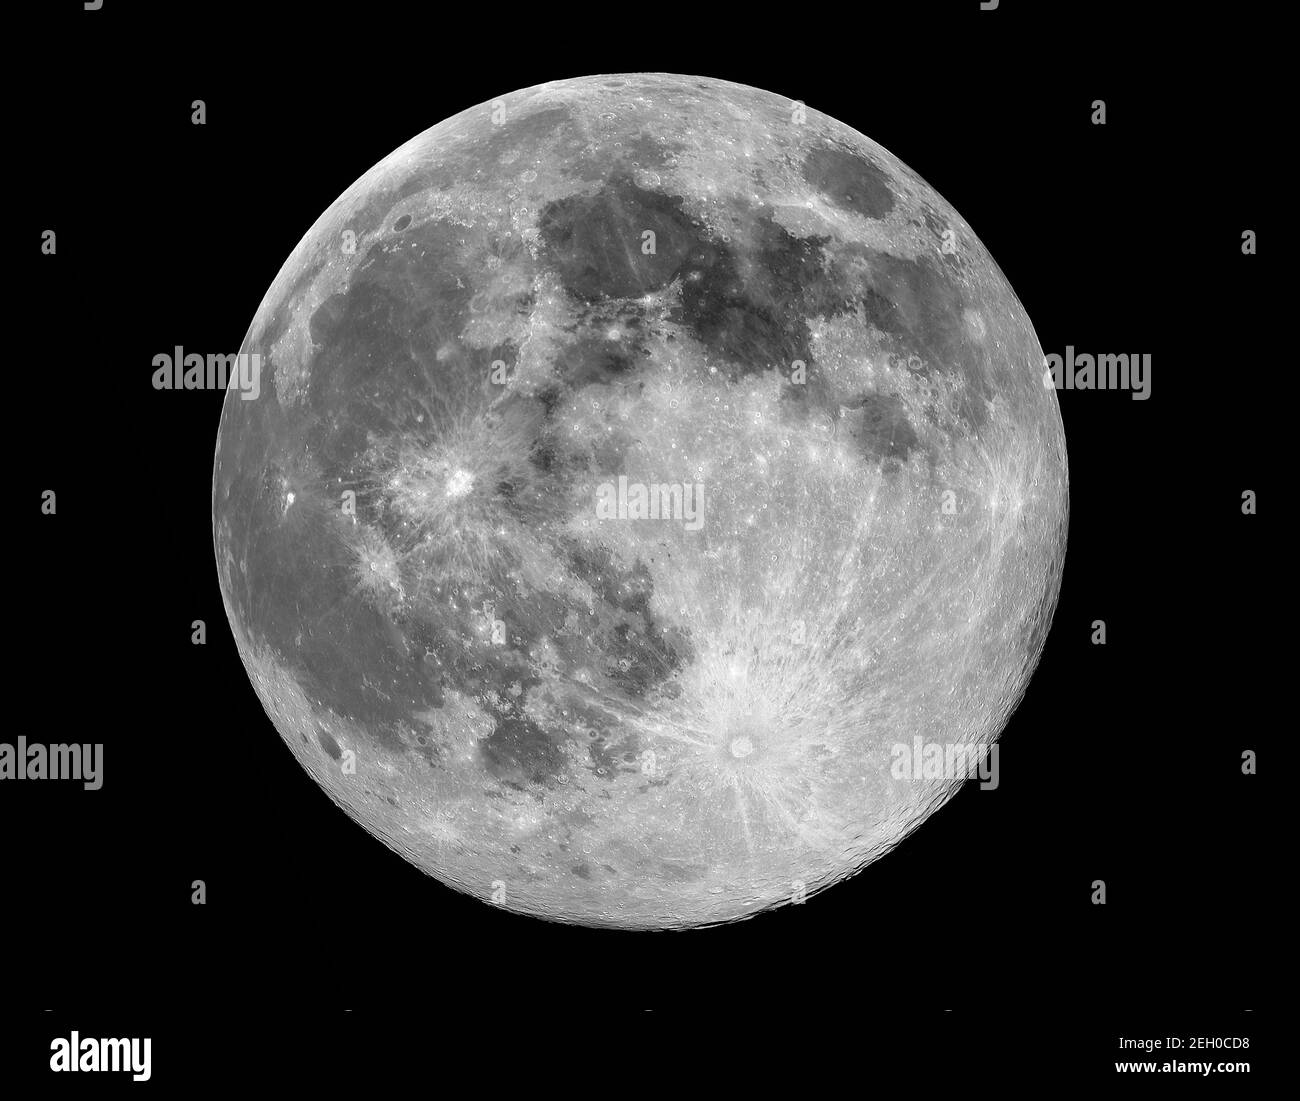 Full Moon with crater detail against black background. Stock Photo